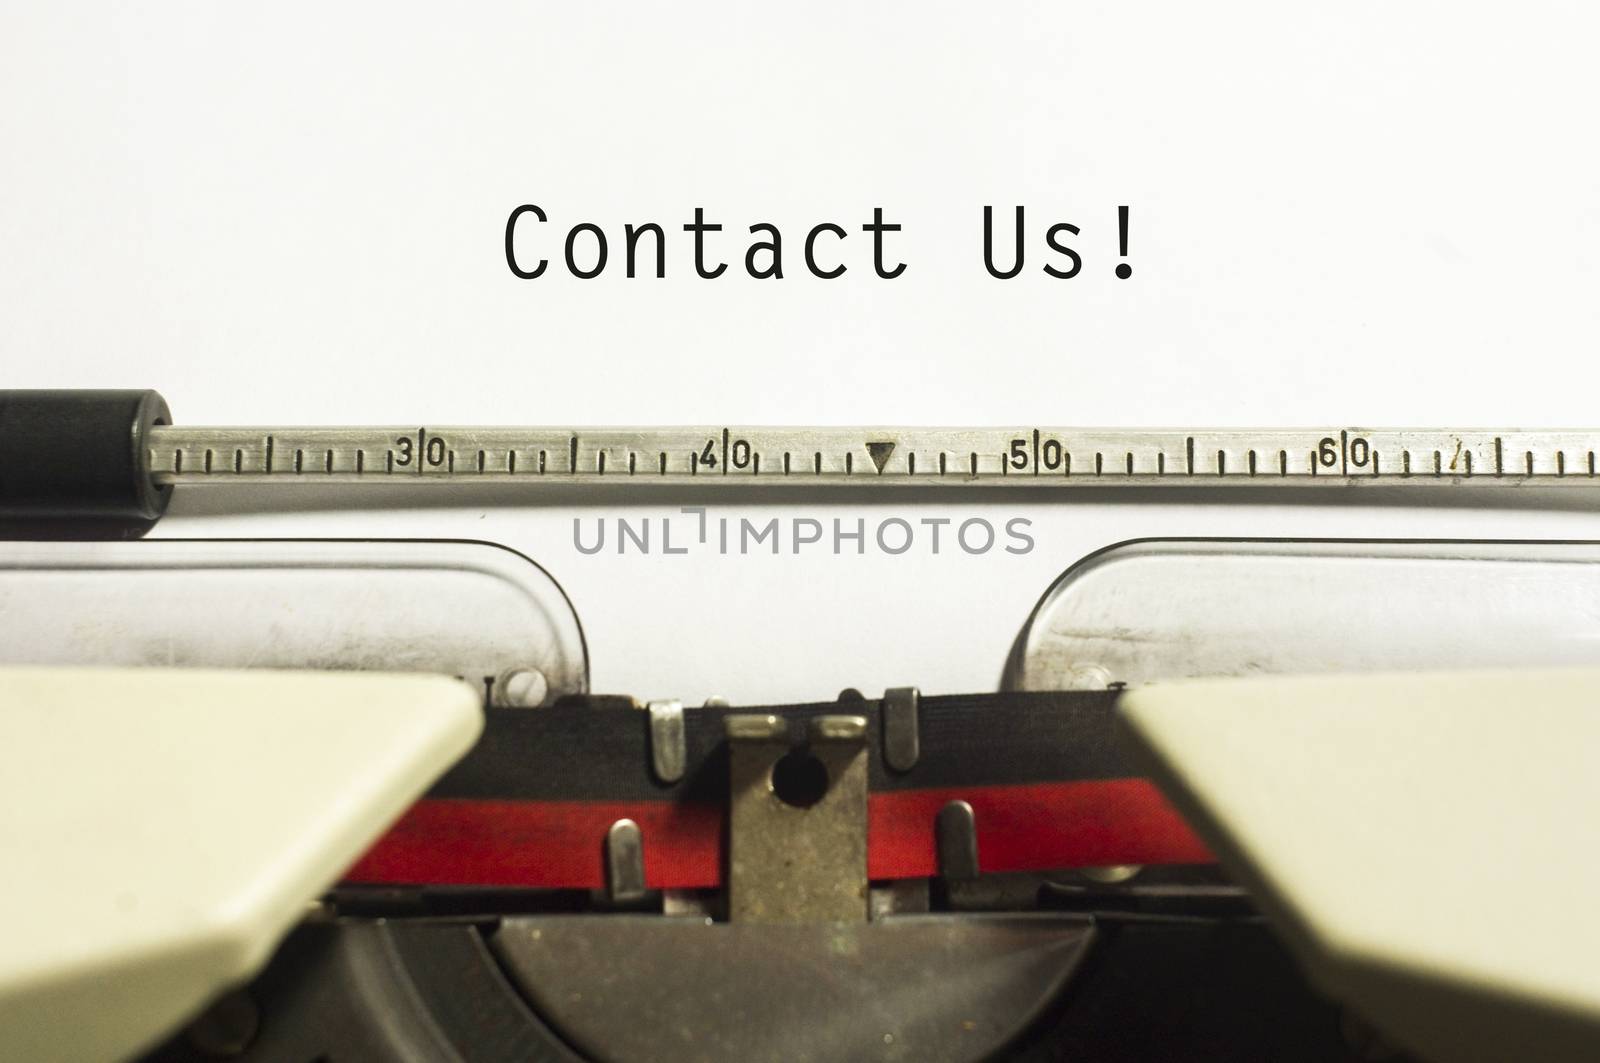 contact us concepts, with message on typewriter paper.